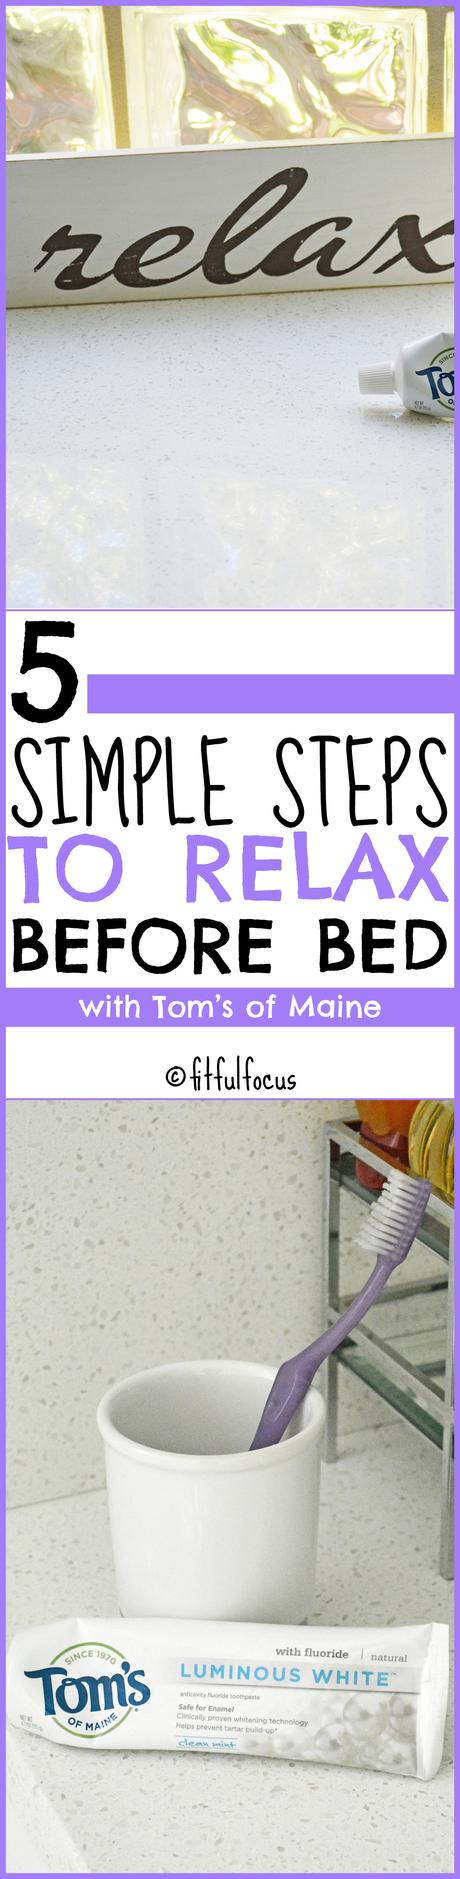 5 Simple Steps to Relax Before Bed with Tom’s of Maine